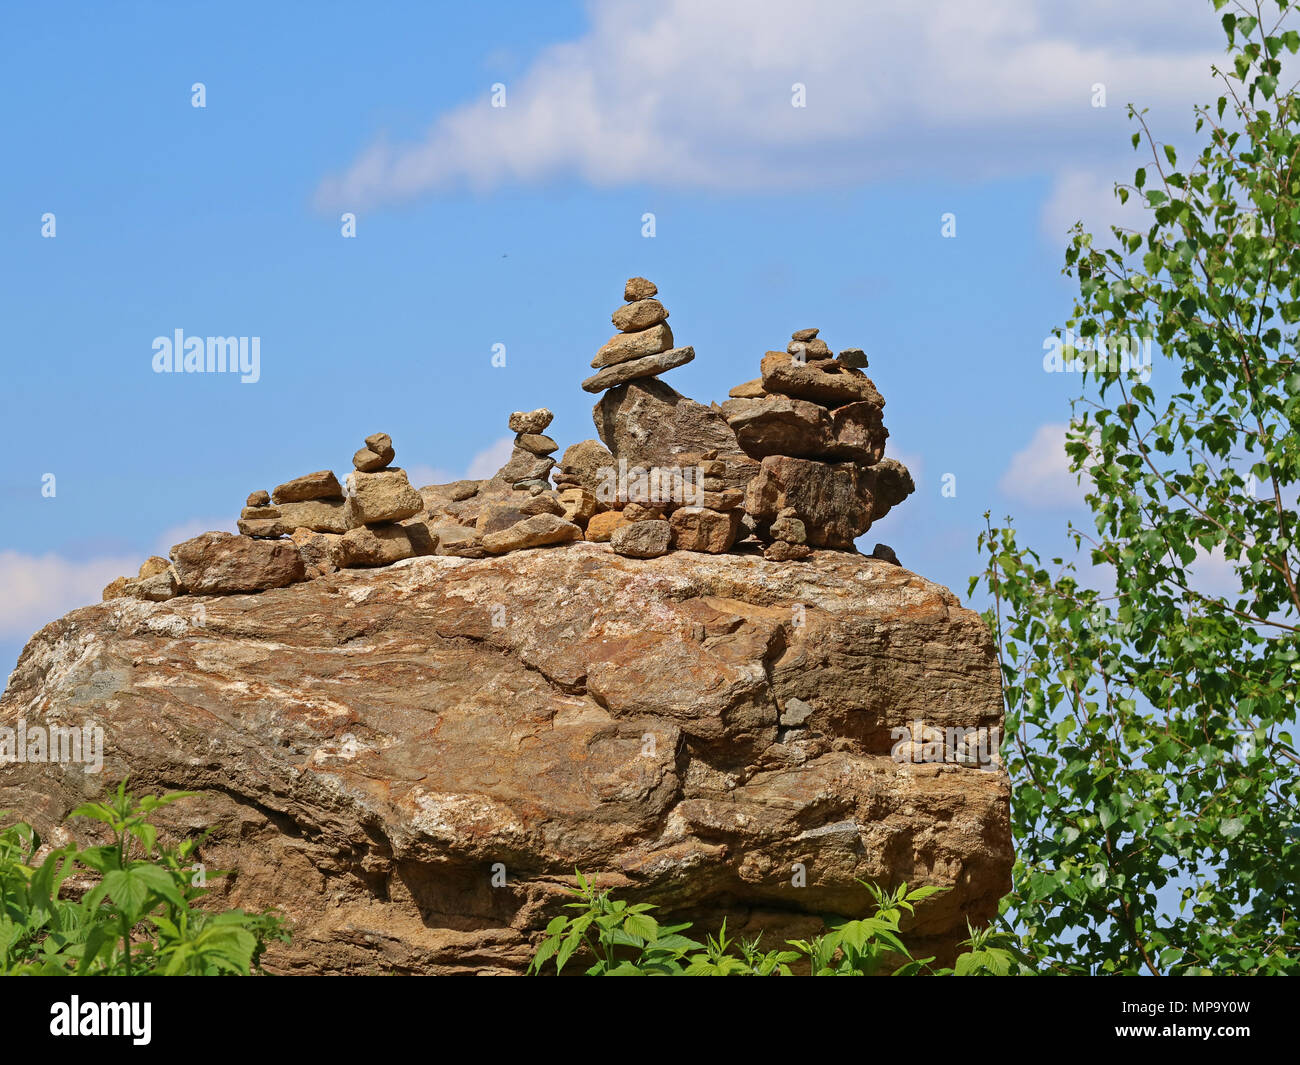 Piles of rocks with blue sky in the background Stock Photo